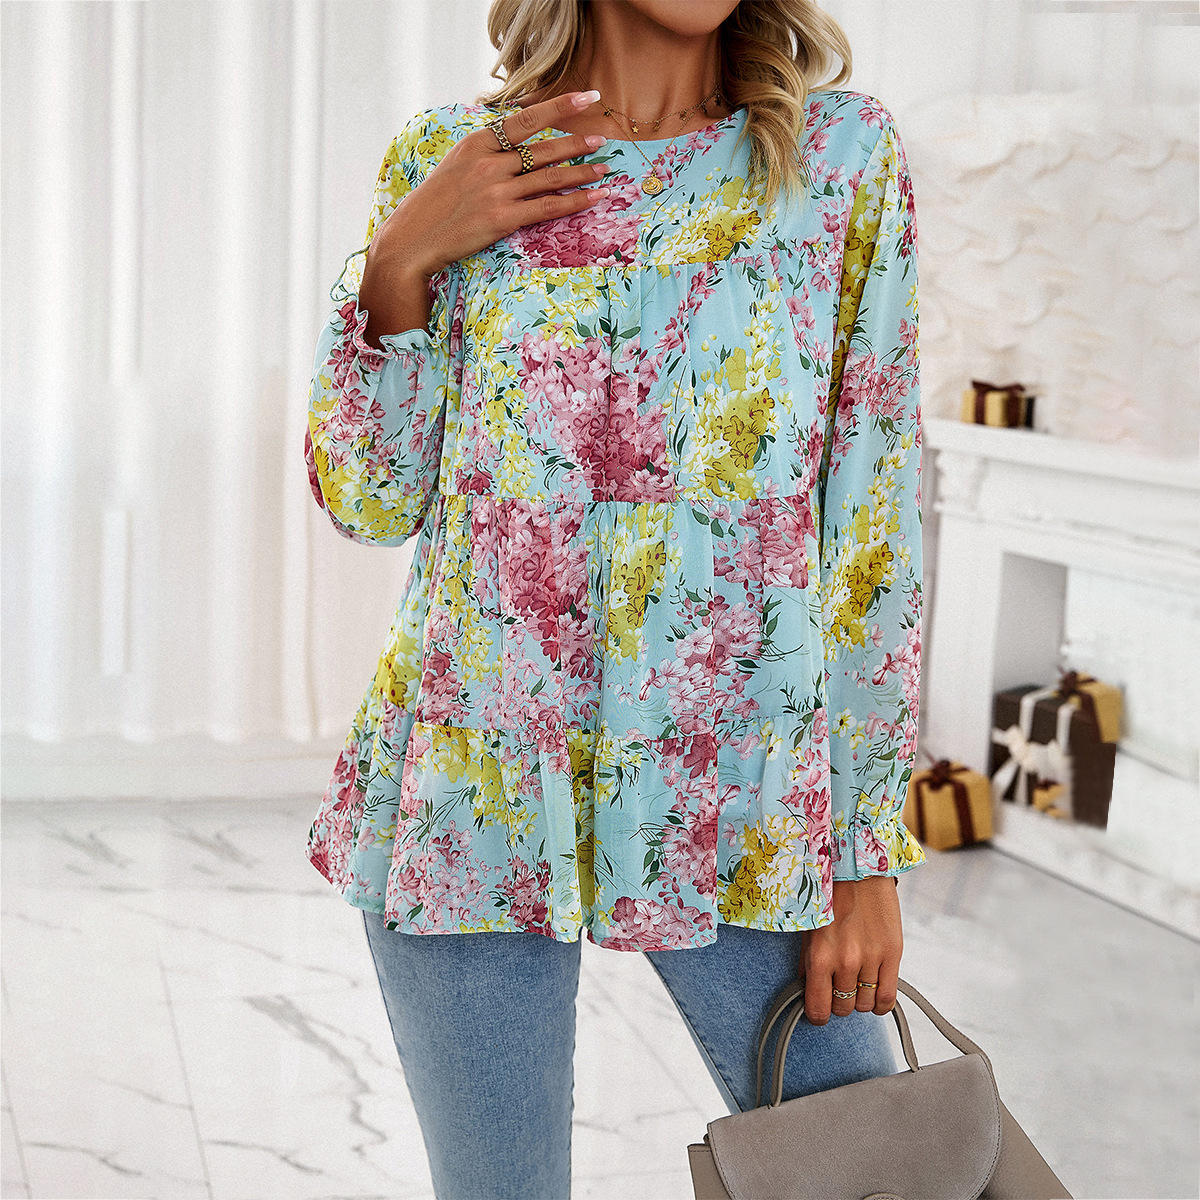 Autumn and winter Casual round neck long sleeve tops